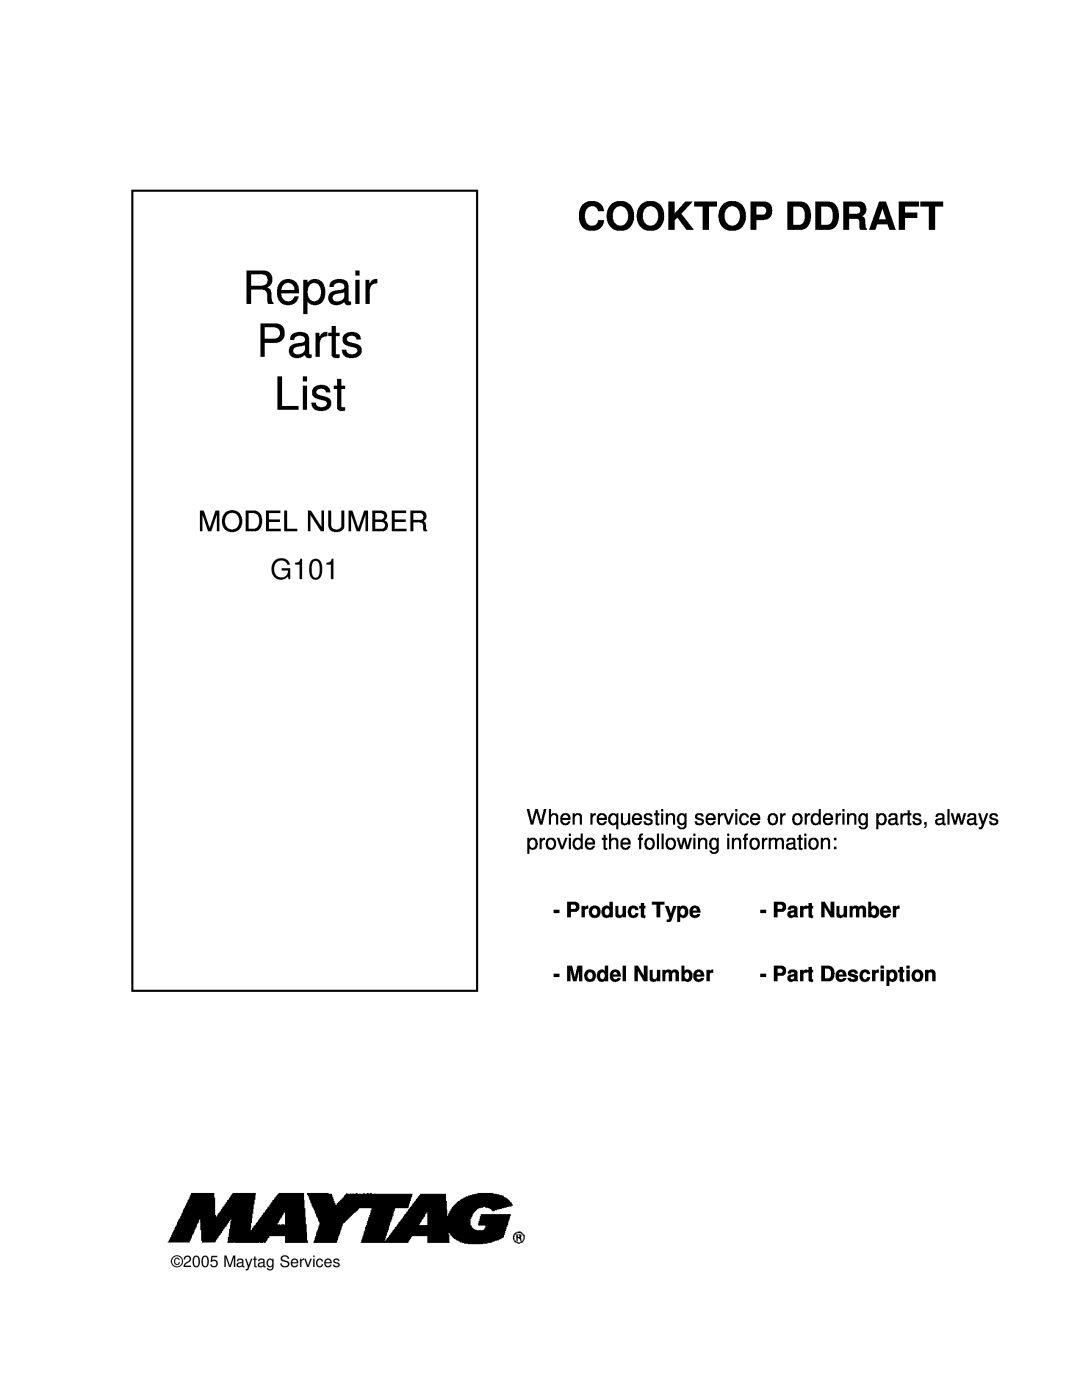 Whirlpool G101 manual Product Type, Part Number, Model Number, Part Description, Repair Parts List, Cooktop Ddraft 